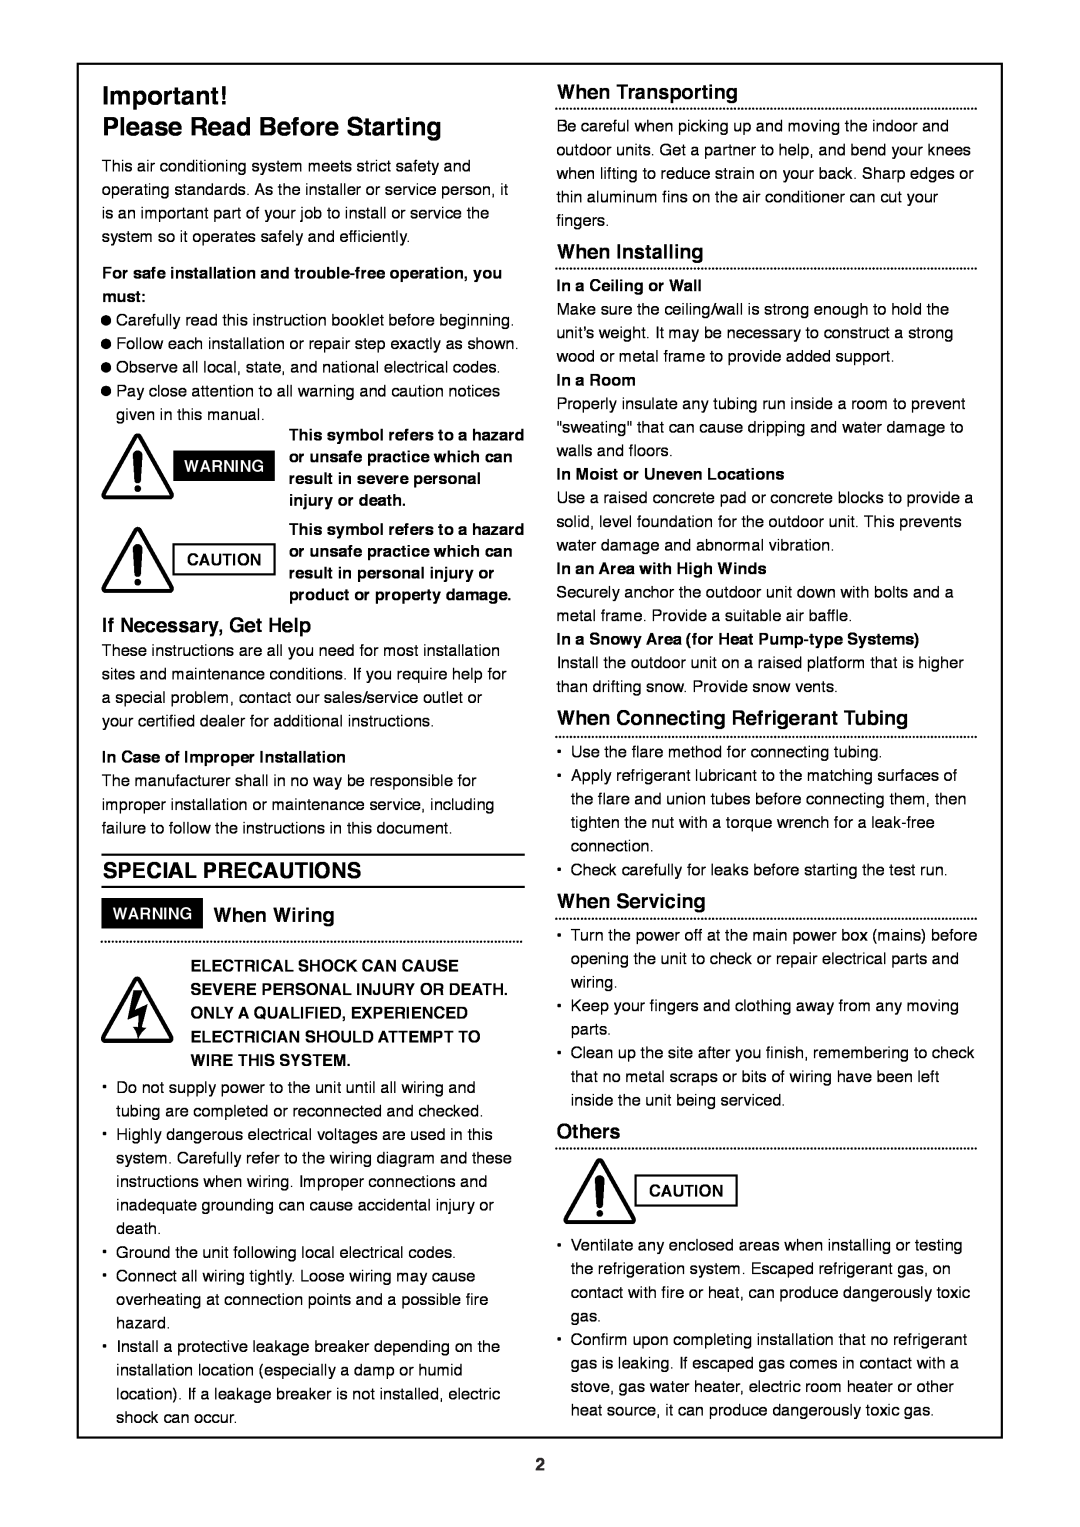 Sanyo SAP-CMRV1426EH-F Please Read Before Starting, If Necessary, Get Help, WARNING When Wiring, When Transporting, Others 